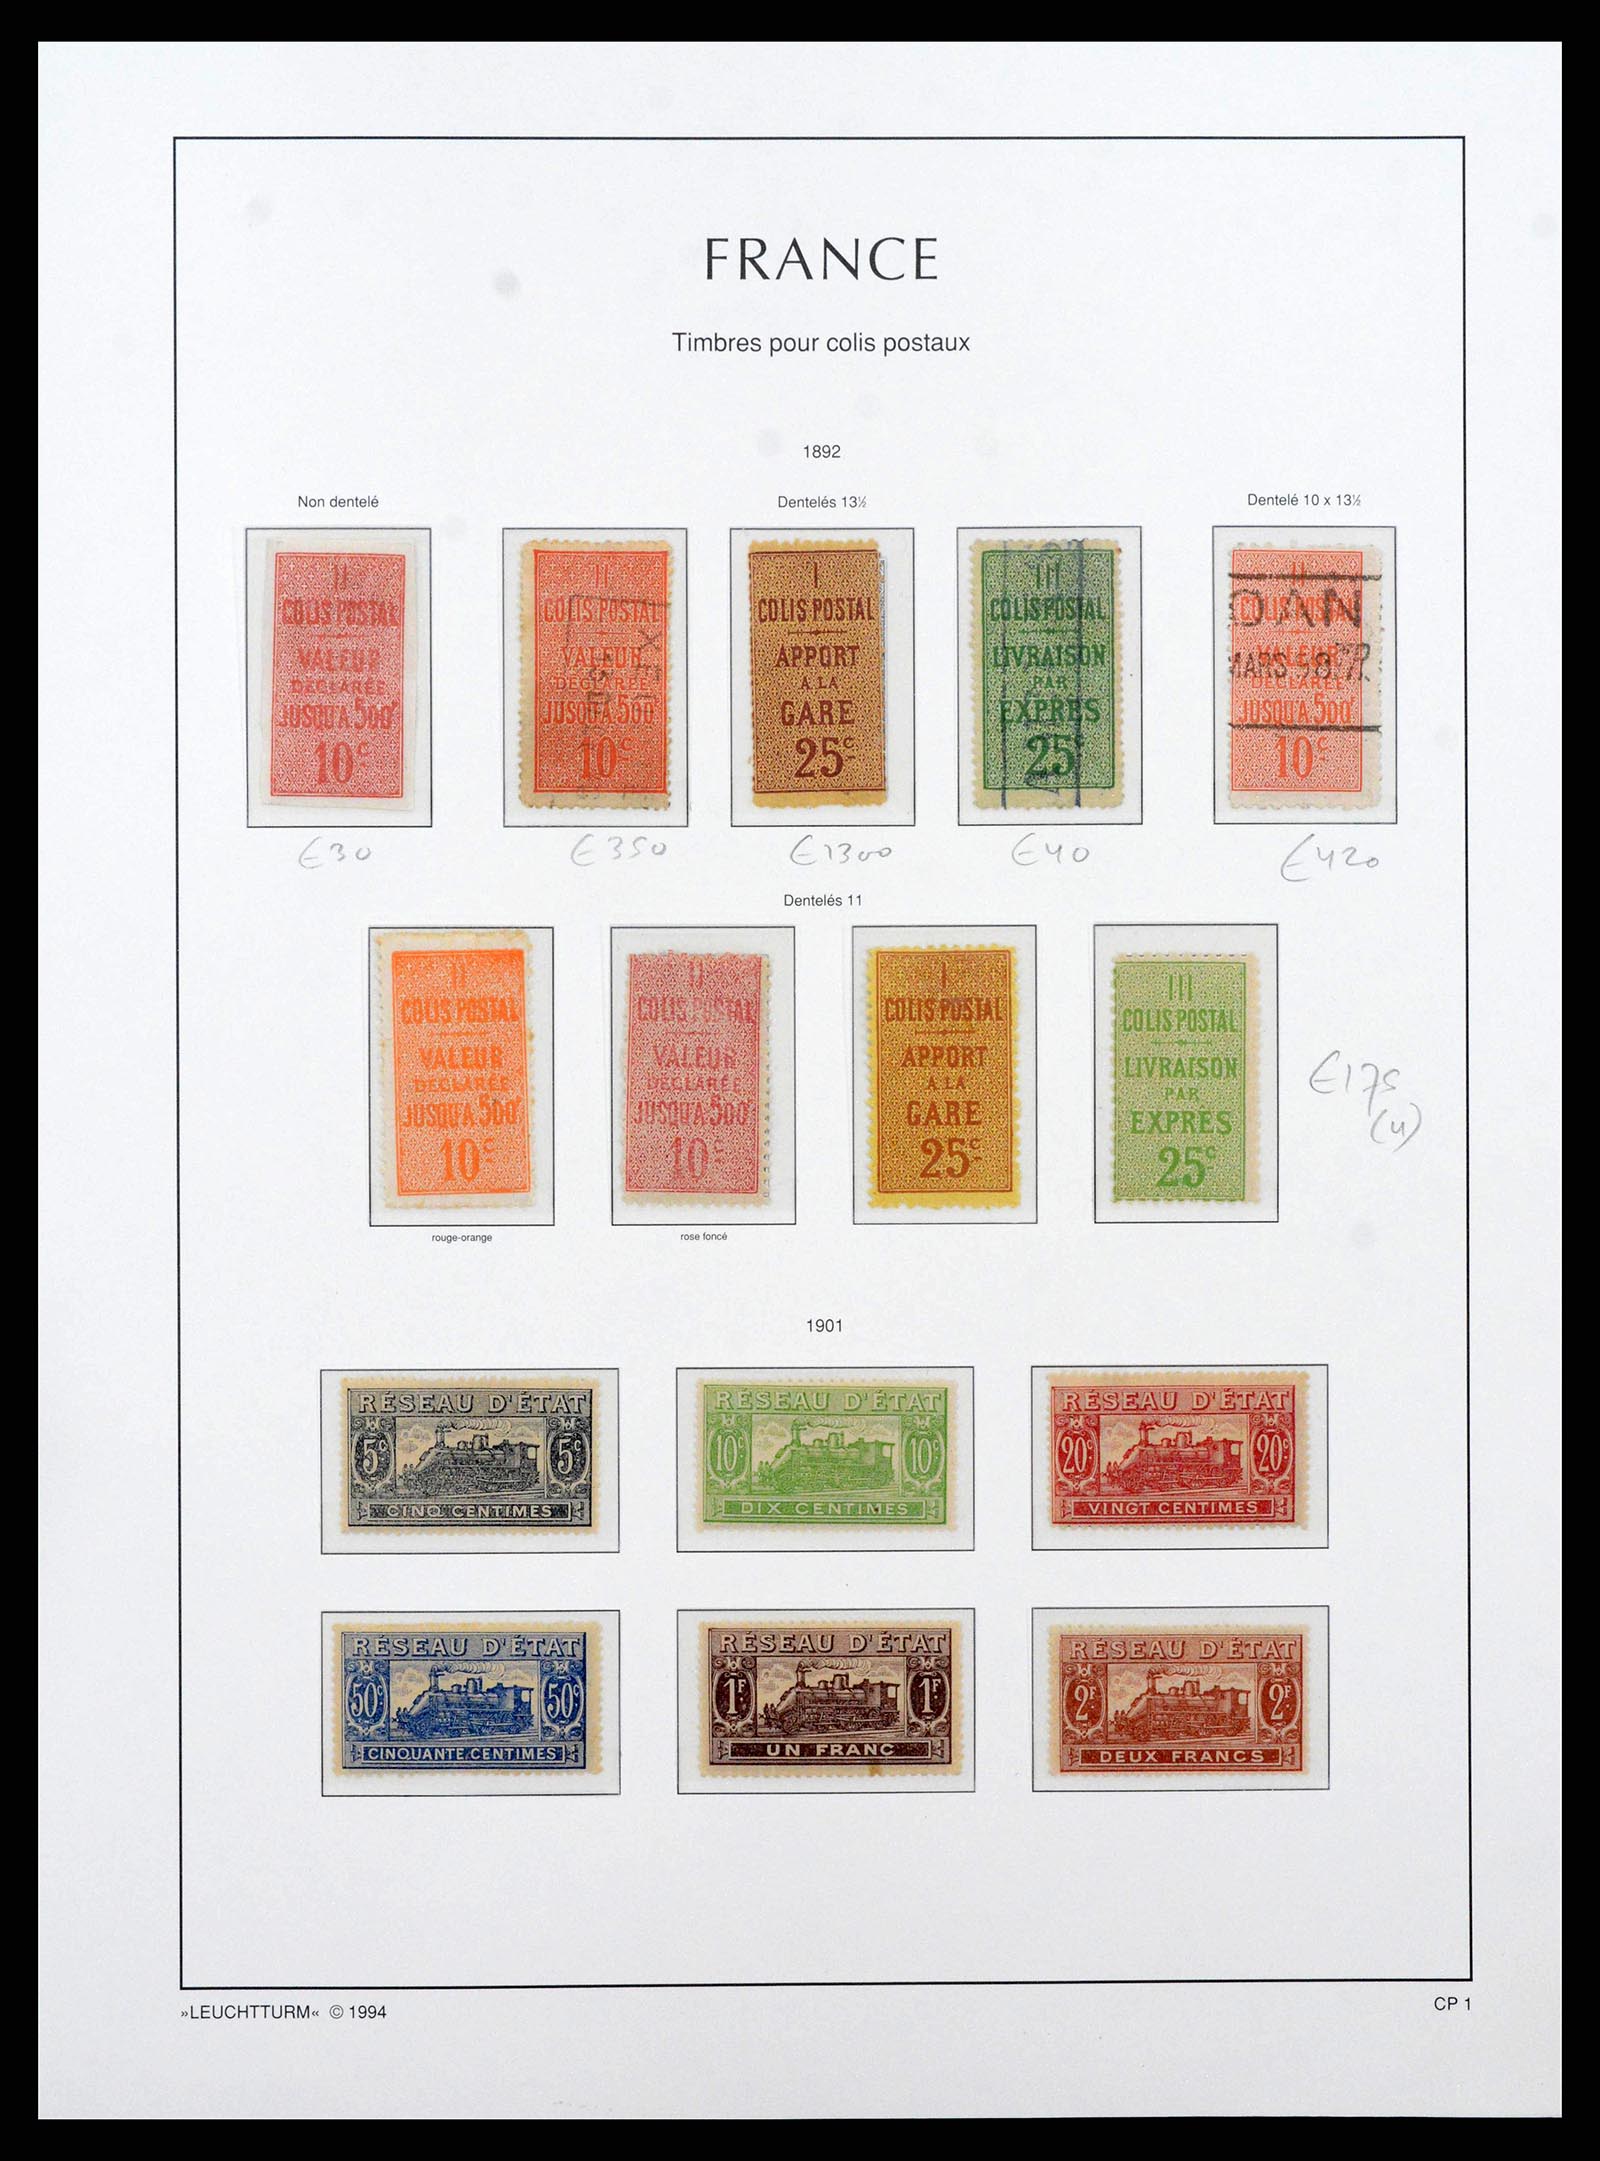 38770 0001 - Stamp collection 38770 France parcelpost stamps 1892-1960.